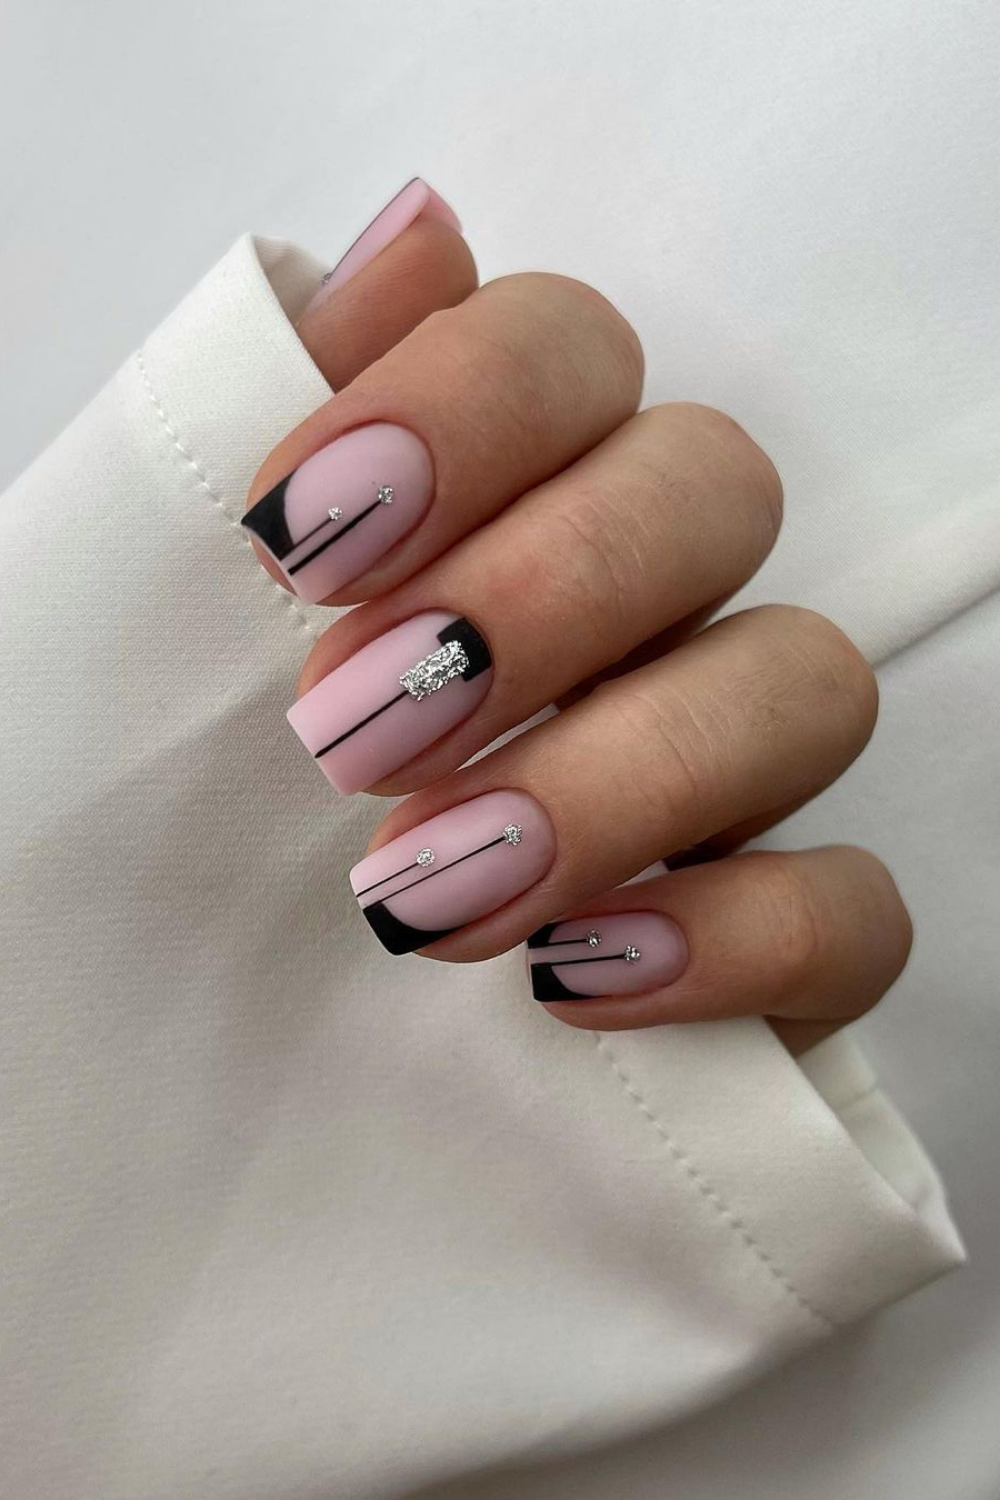 Cute Pink Nail Designs That You\'ll Want to Copy - The Catalog